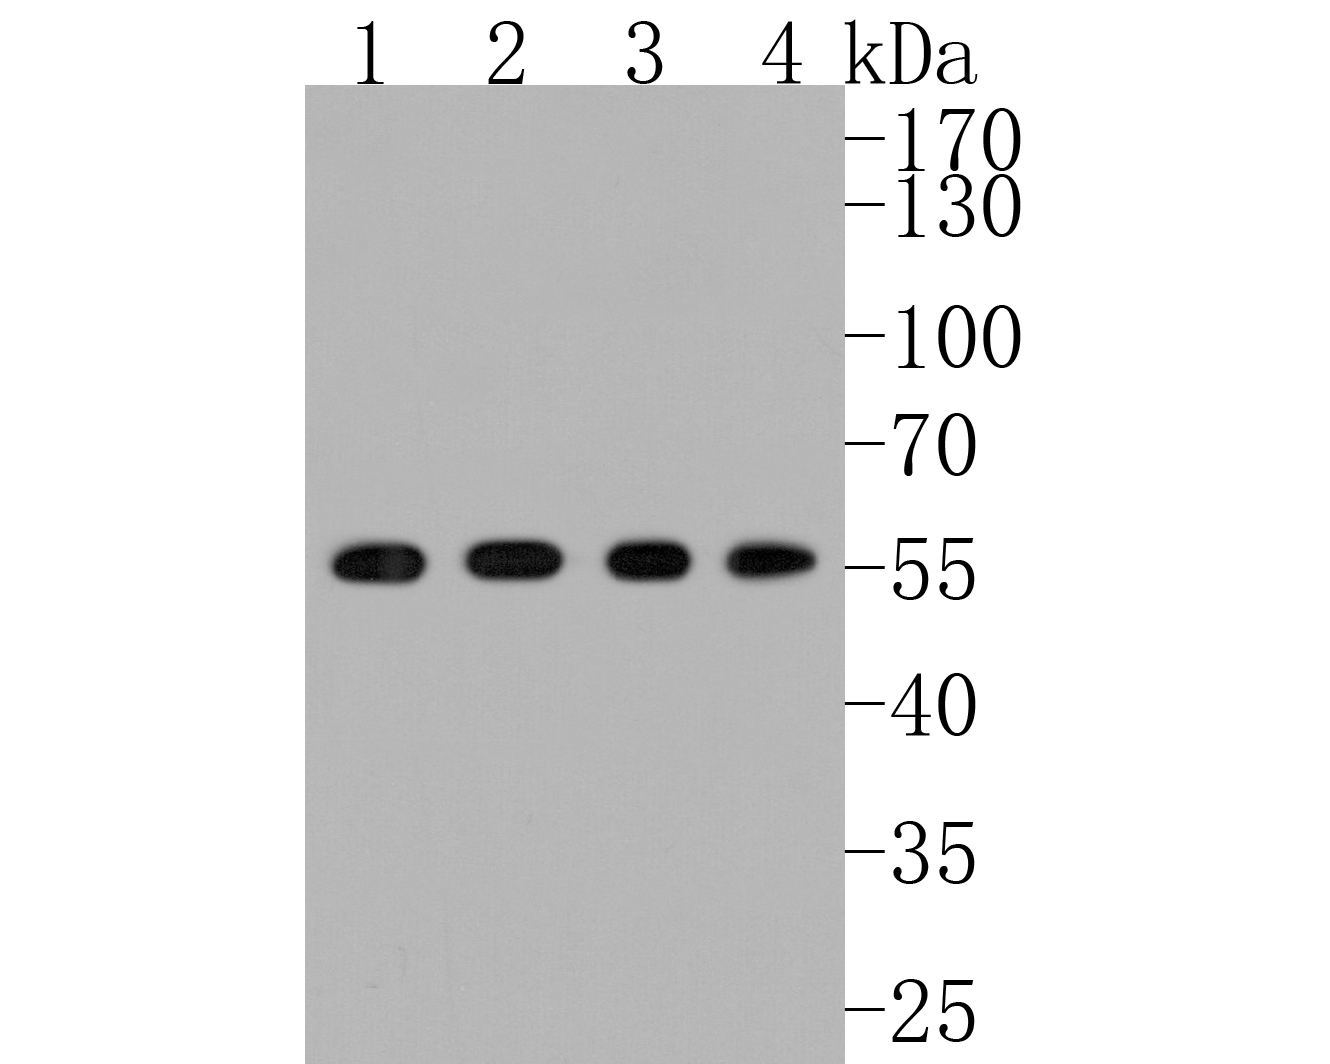 Western blot analysis of Src on different lysates. Proteins were transferred to a PVDF membrane and blocked with 5% BSA in PBS for 1 hour at room temperature. The primary antibody (ET1702-03, 1/500) was used in 5% BSA at room temperature for 2 hours. Goat Anti-Rabbit IgG - HRP Secondary Antibody (HA1001) at 1:5,000 dilution was used for 1 hour at room temperature.<br />
Positive control: <br />
Lane 1: HUVEC cell lysate<br />
Lane 2: A549 cell lysate<br />
Lane 3: PC-3M cell lysate<br />
Lane 4: SH-SY5Y cell lysate